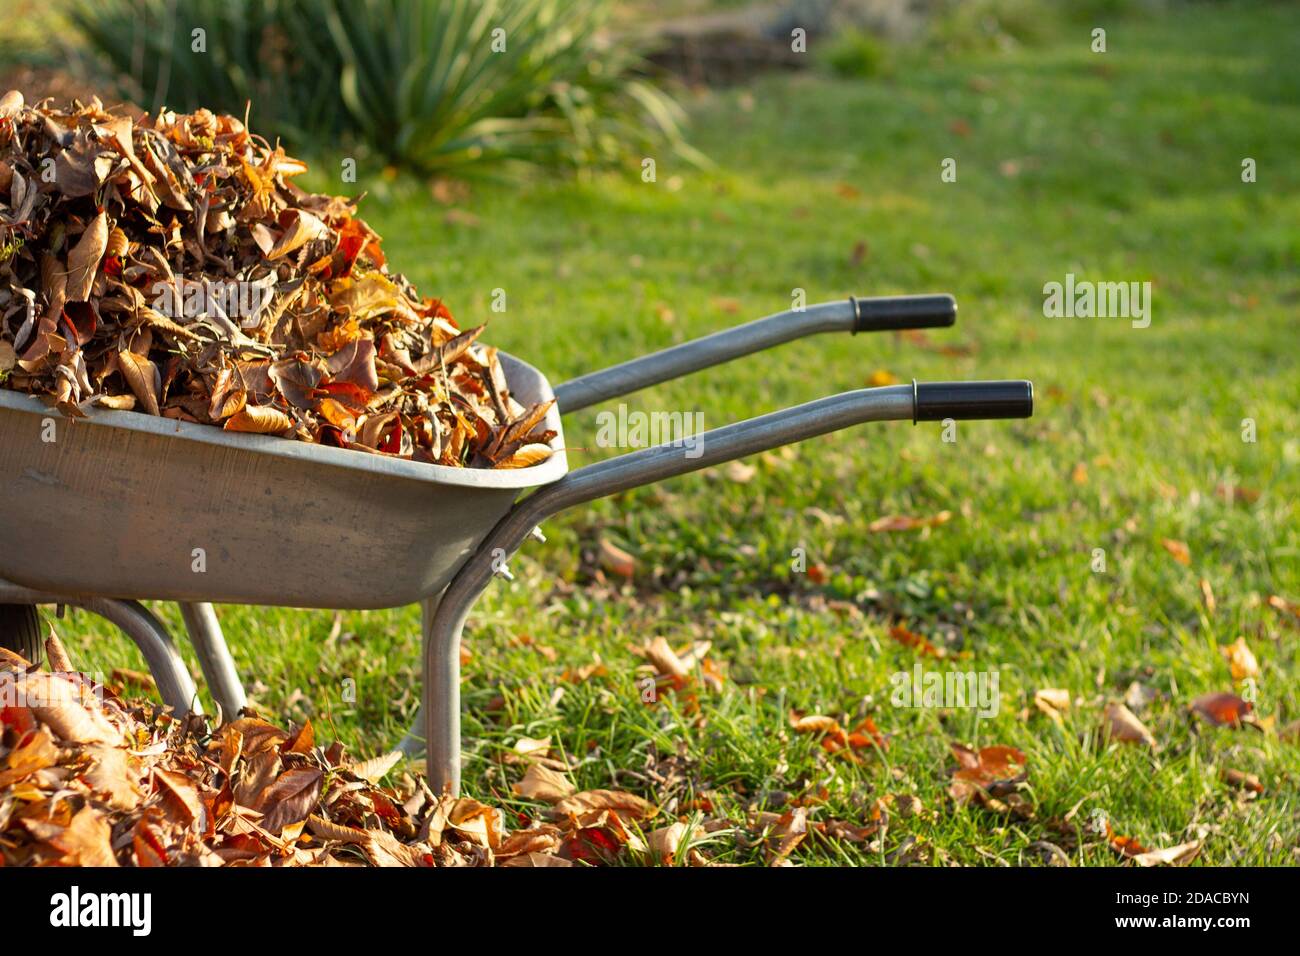 wheelbarrow full of dried leaves, cleaning foliage in the garden Stock Photo